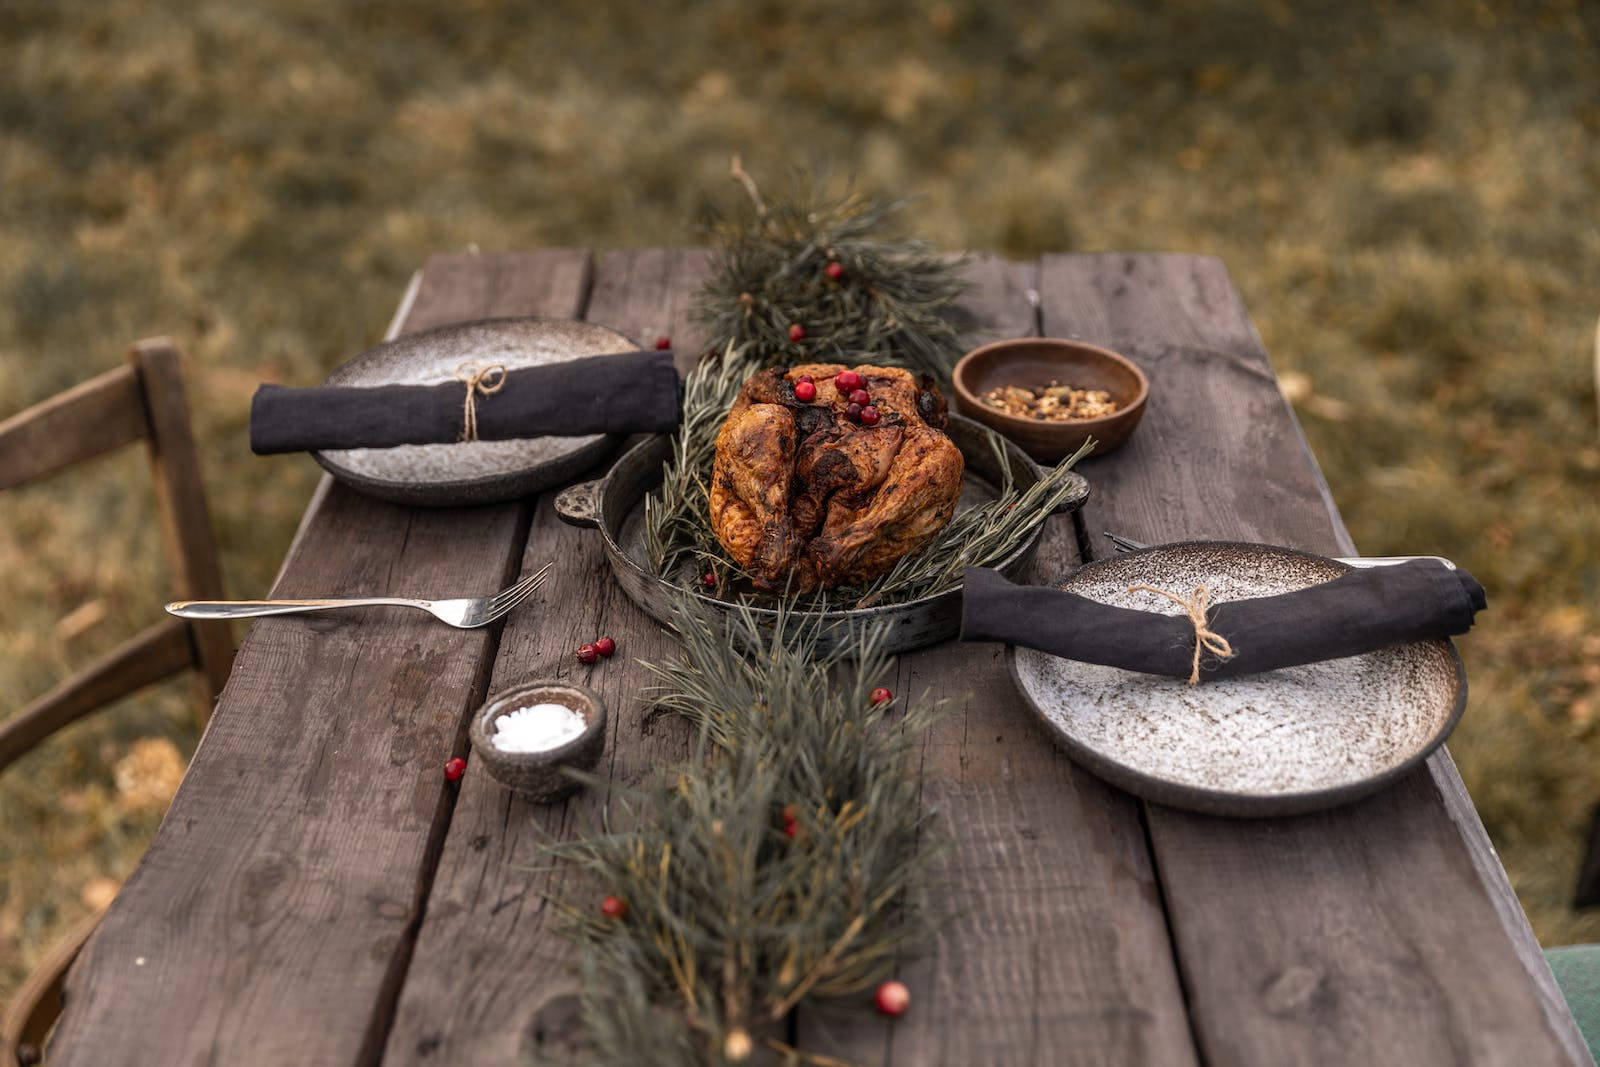 Rustic Thanksgiving Day Table Set Up